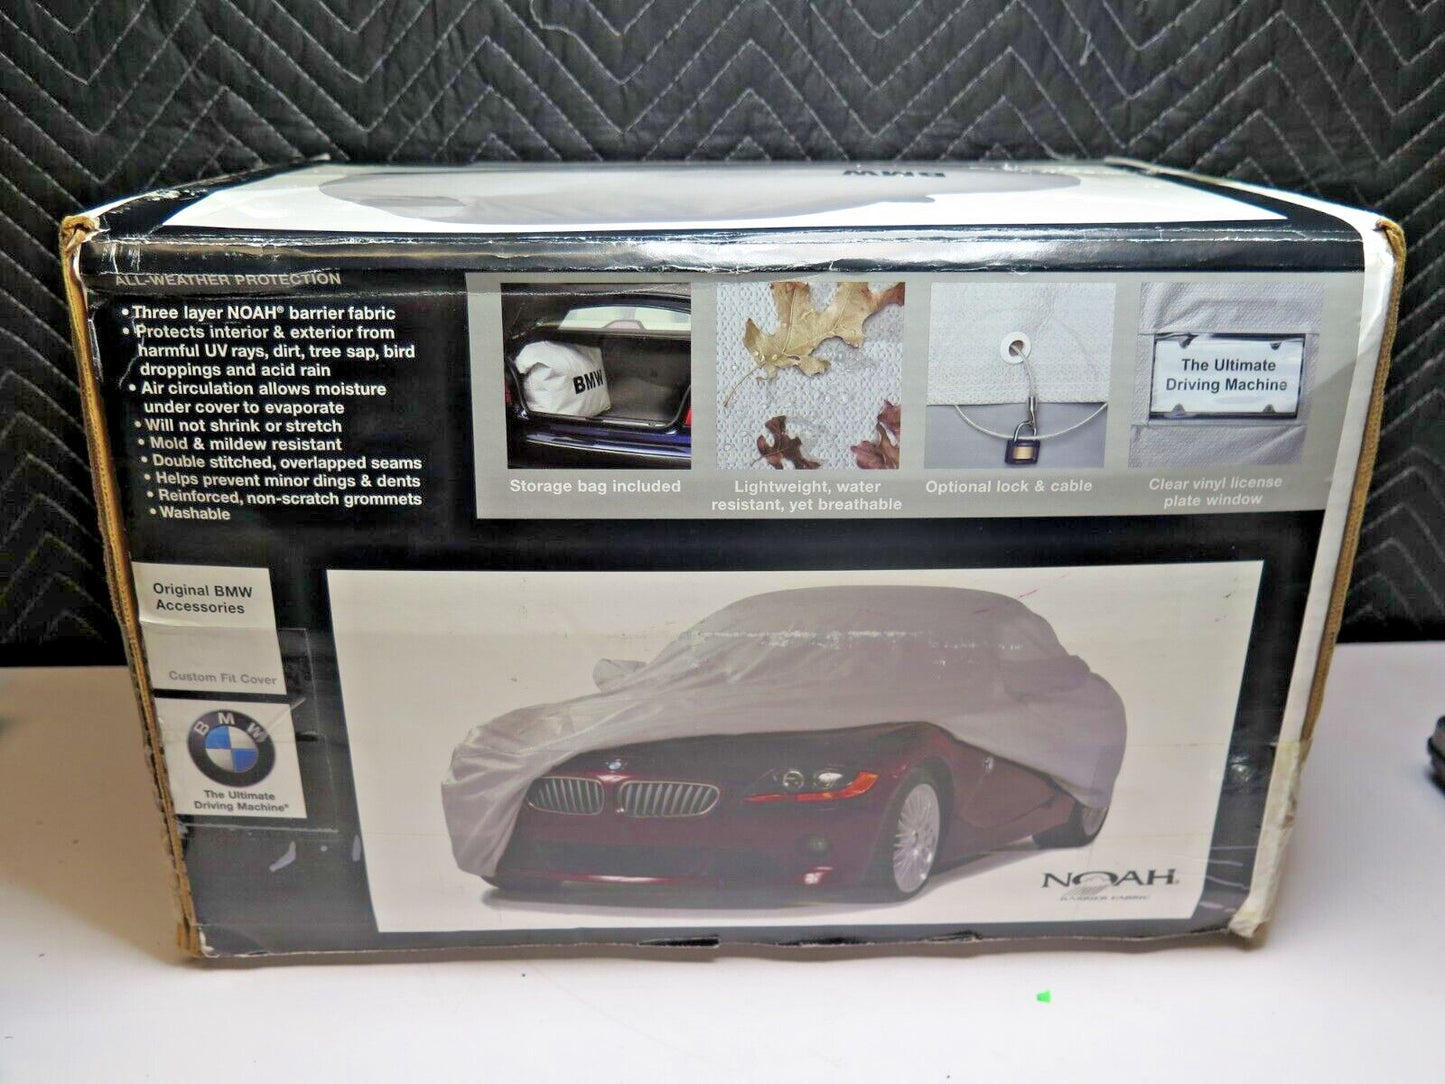 Genuine BMW 82-11-0-037-330, F01 7 Series Outdoor Car Cover, FREE  Shipping on Most Orders $499+ OEMG!